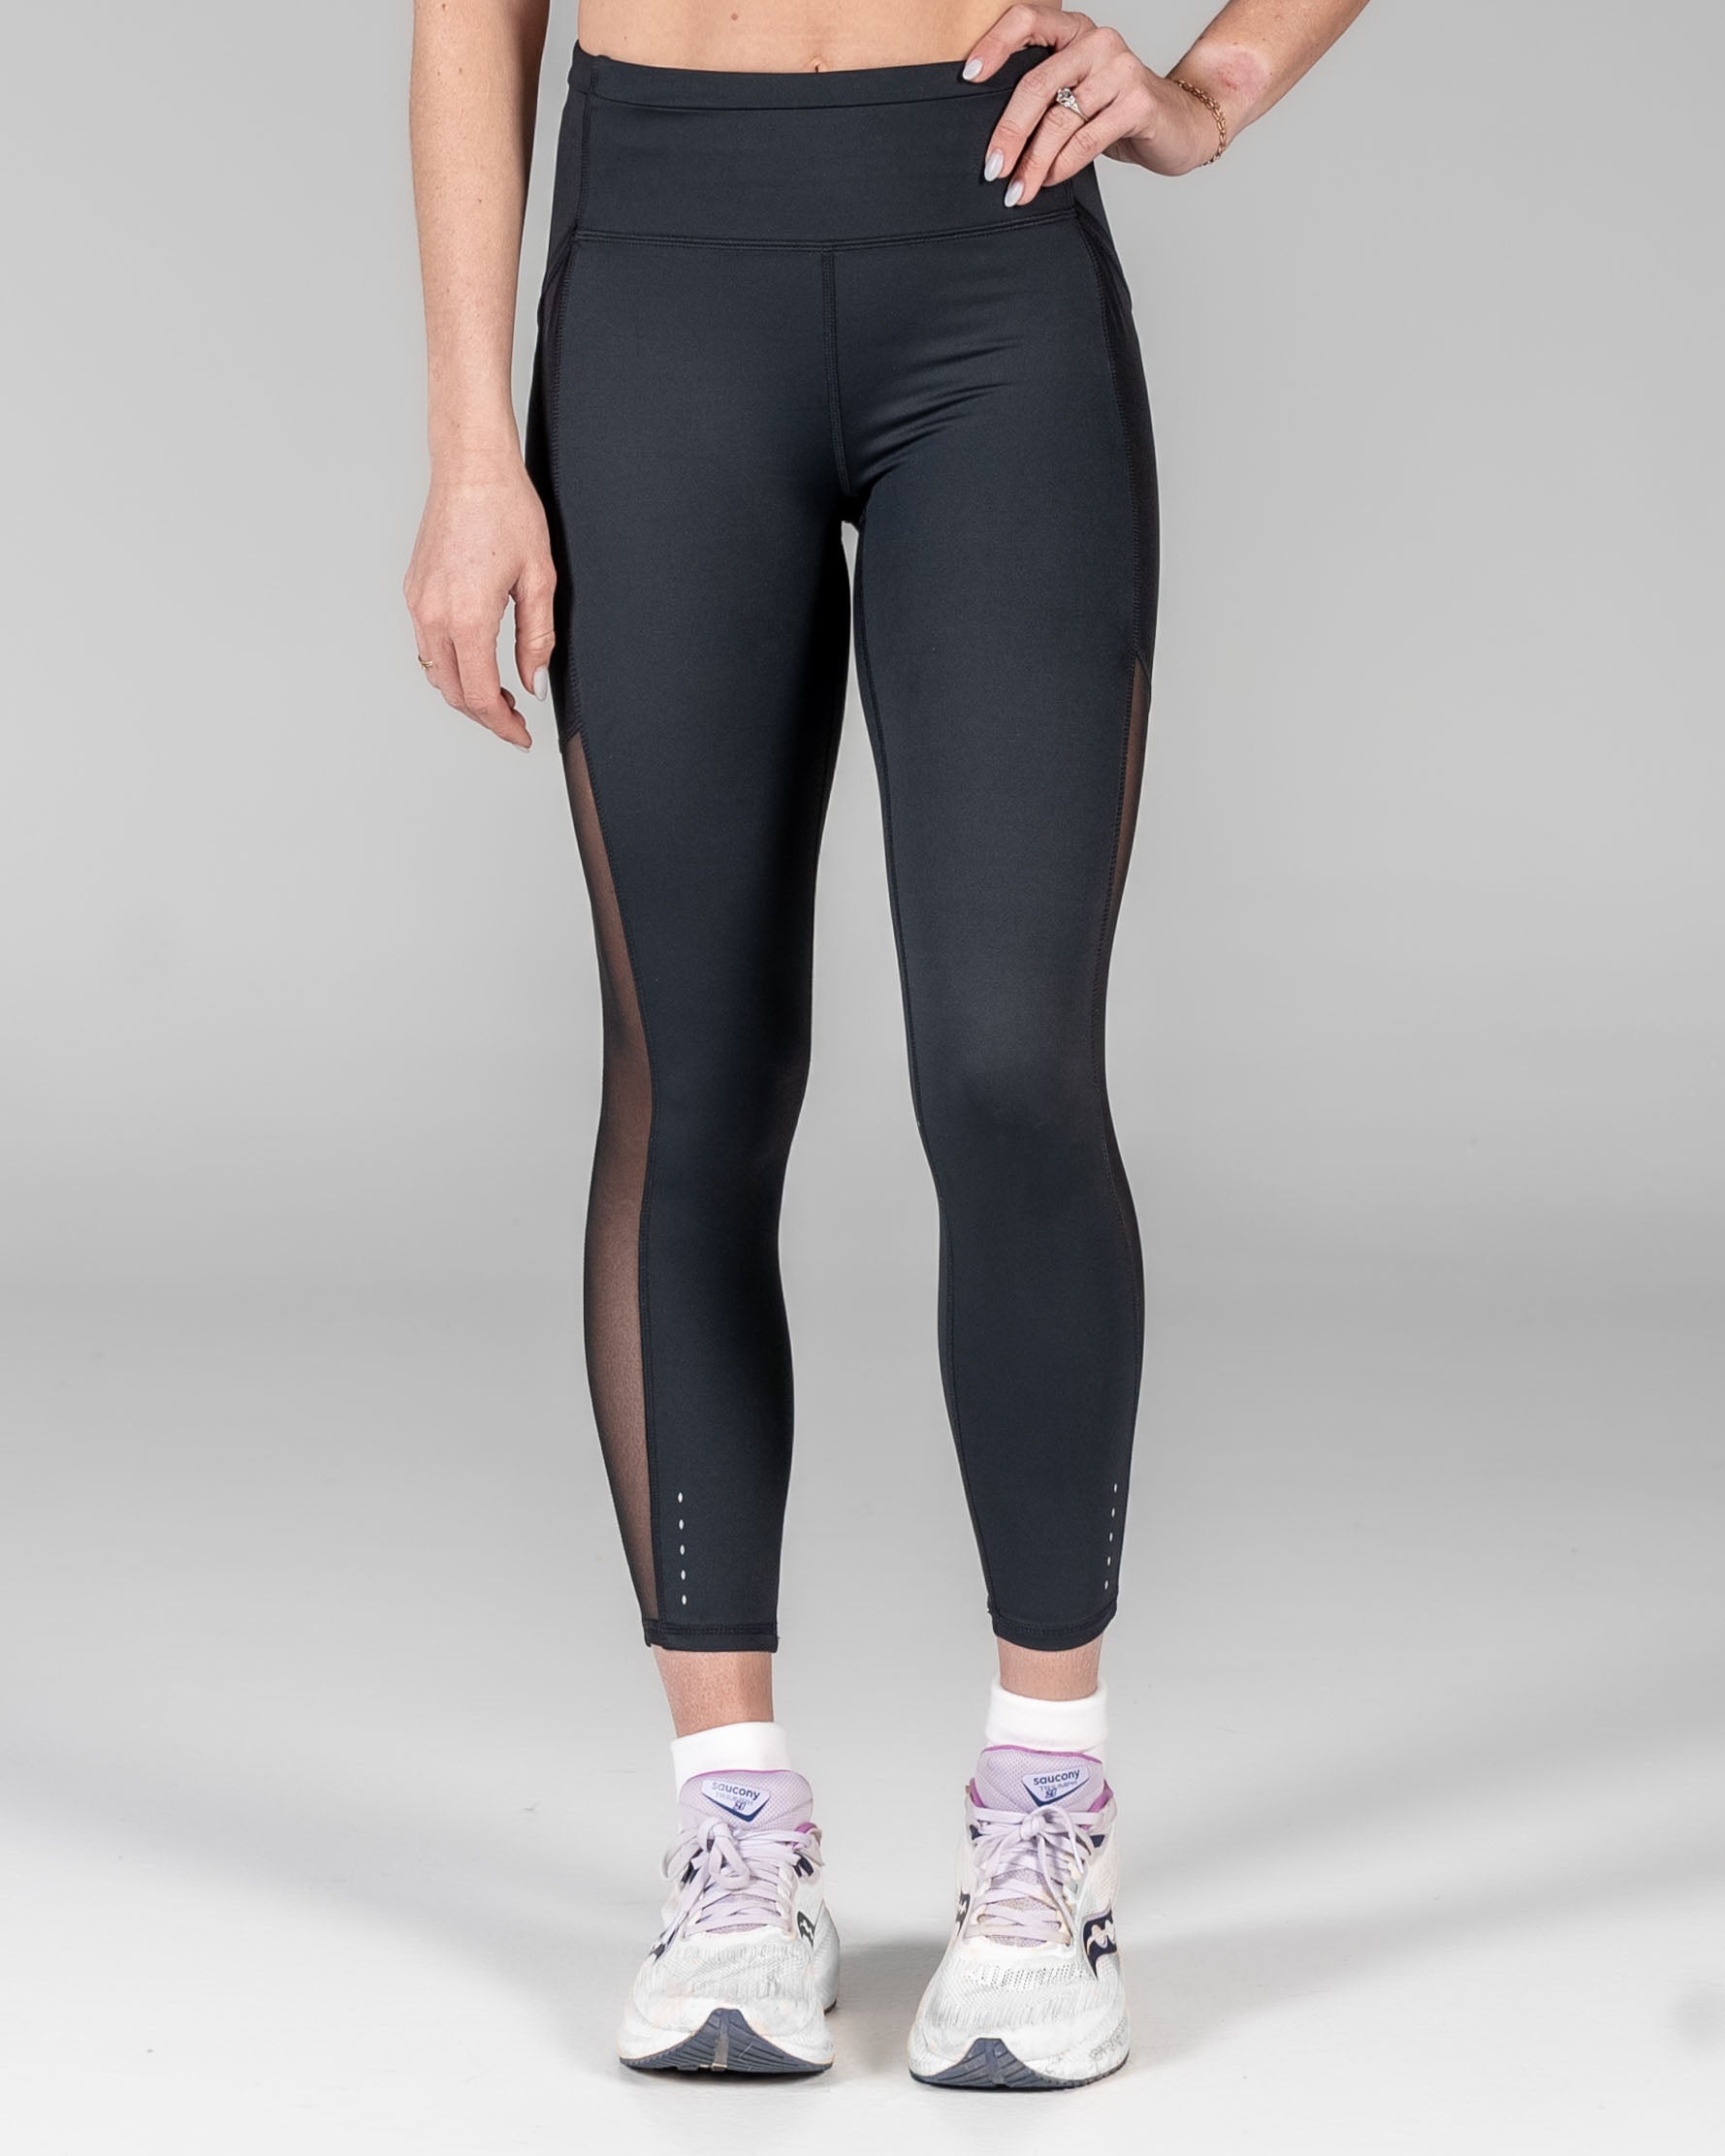 Lux Legging (Jet Black) - New Dimensions Active - Limited Edition